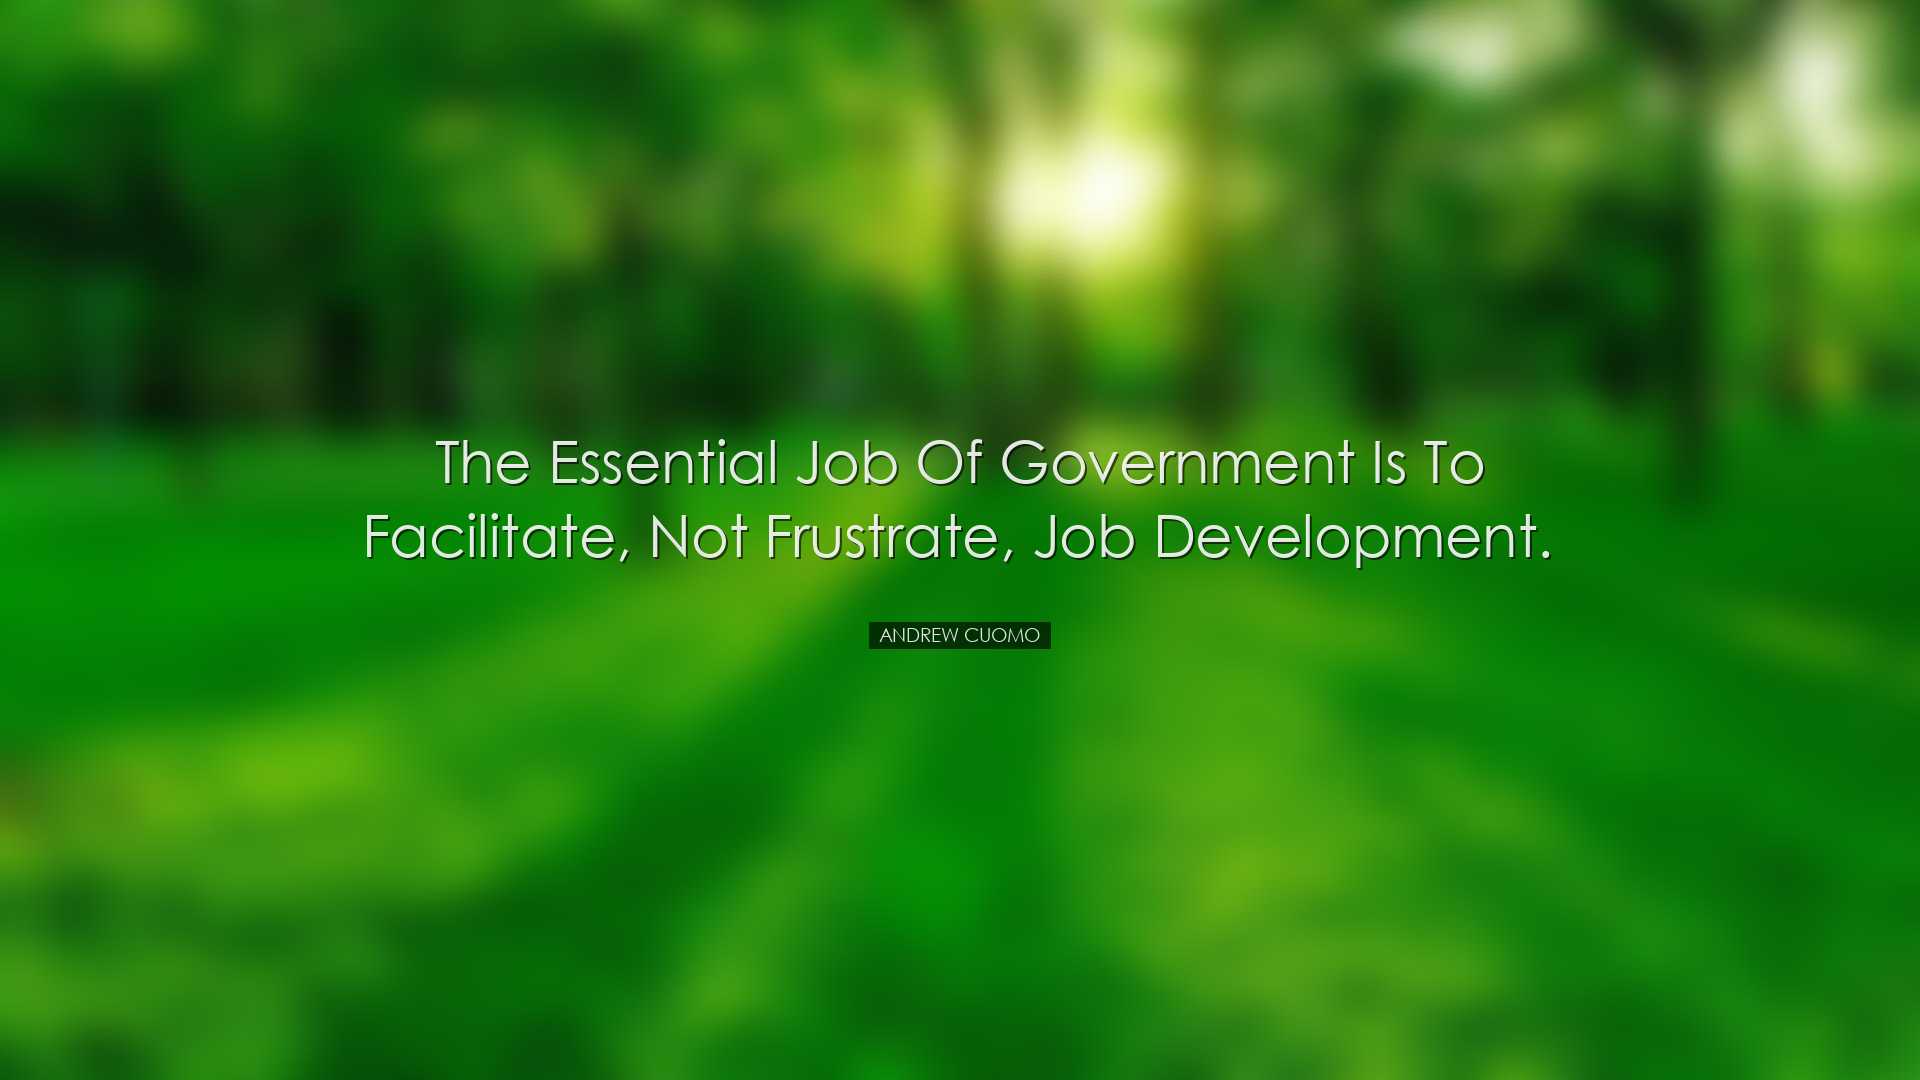 The essential job of government is to facilitate, not frustrate, j